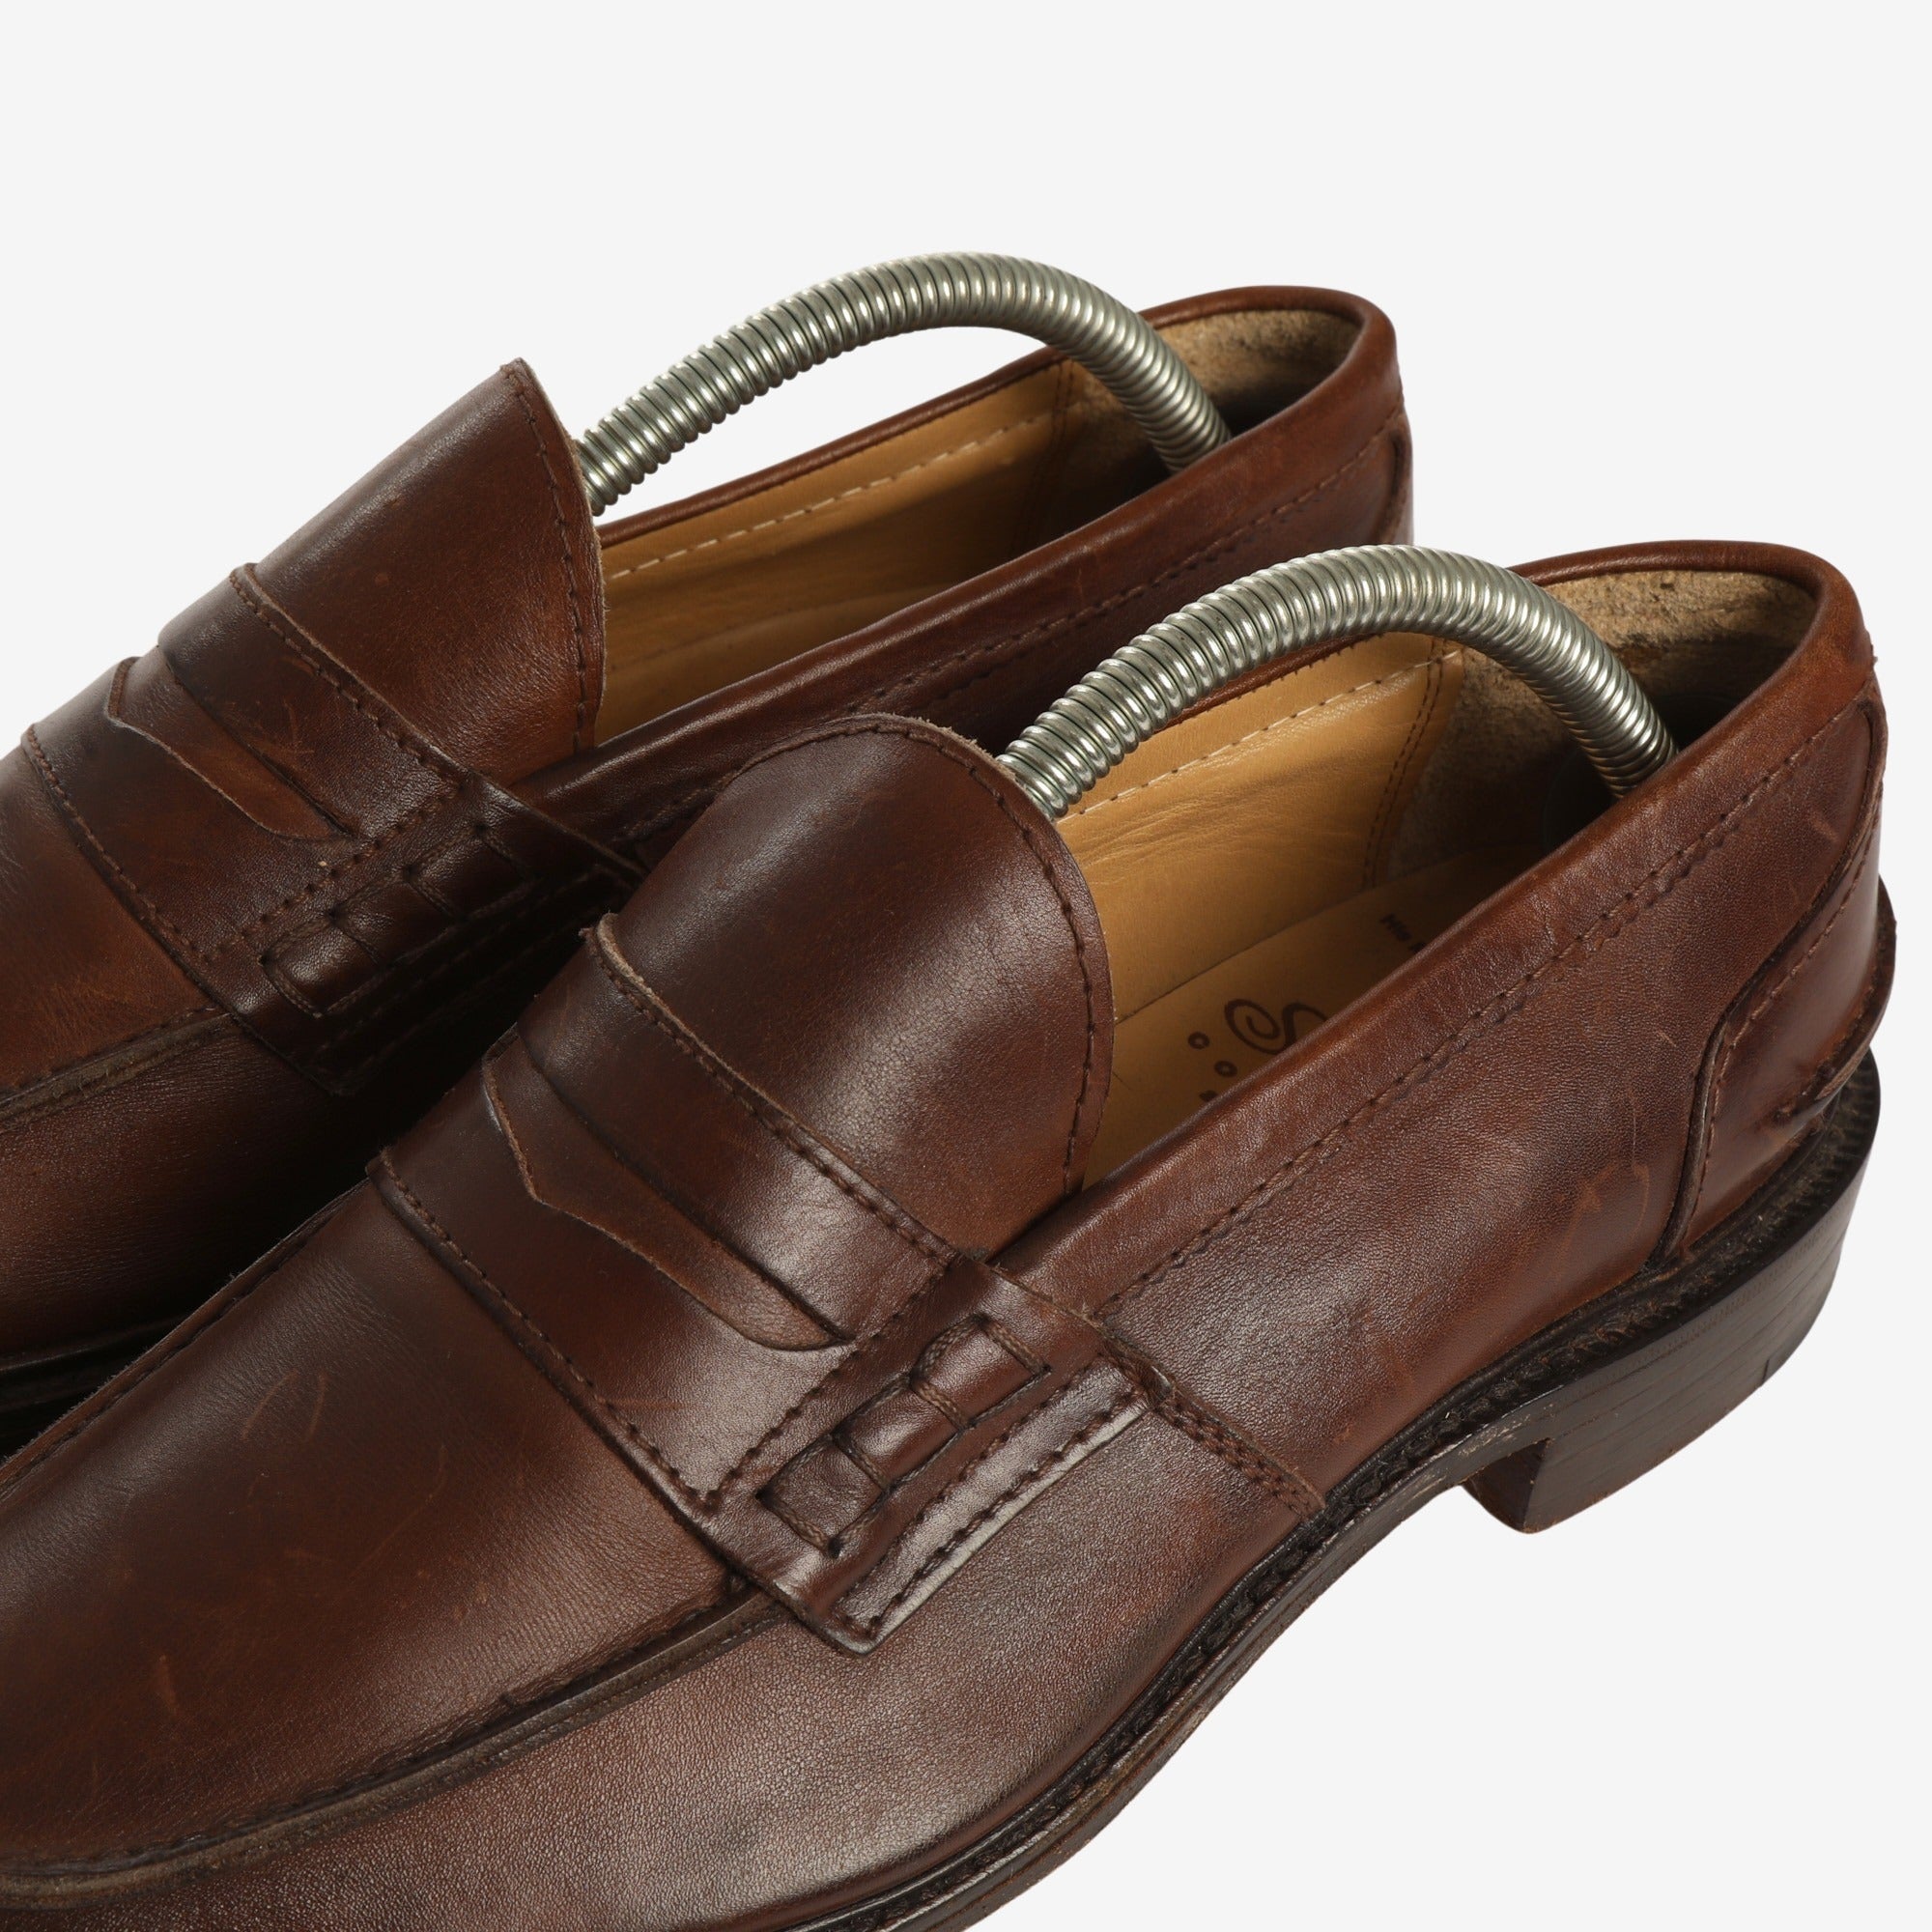 St James Loafers